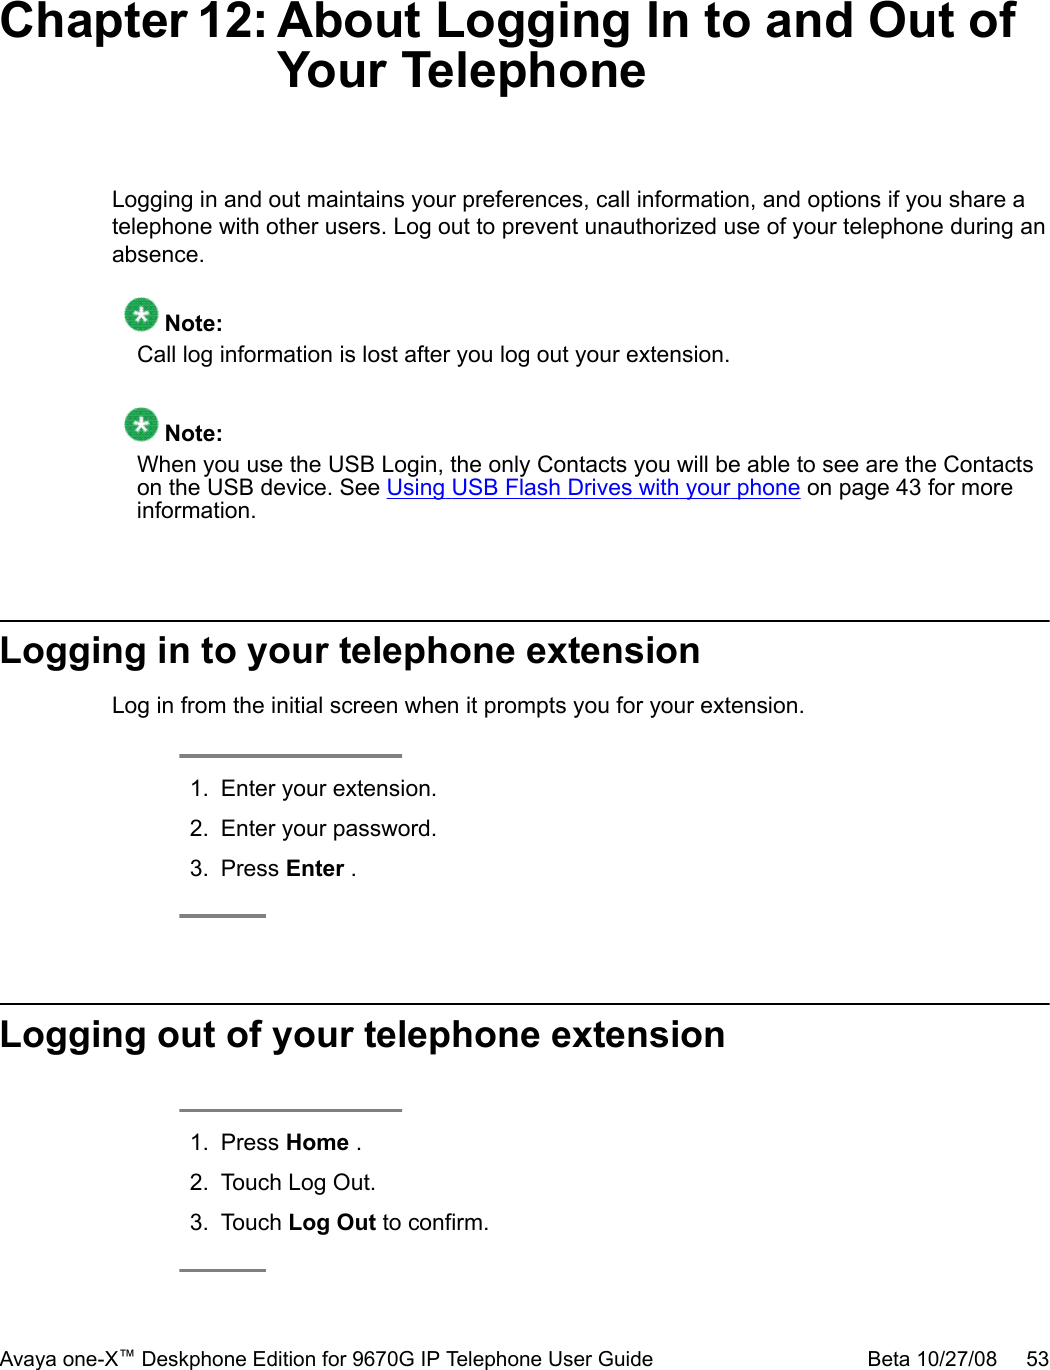 Chapter 12: About Logging In to and Out ofYour TelephoneLogging in and out maintains your preferences, call information, and options if you share atelephone with other users. Log out to prevent unauthorized use of your telephone during anabsence. Note:Call log information is lost after you log out your extension. Note:When you use the USB Login, the only Contacts you will be able to see are the Contactson the USB device. See Using USB Flash Drives with your phone on page 43 for moreinformation.Logging in to your telephone extensionLog in from the initial screen when it prompts you for your extension.1. Enter your extension.2. Enter your password.3. Press Enter .Logging out of your telephone extension1. Press Home .2. Touch Log Out.3. Touch Log Out to confirm.Avaya one-X™ Deskphone Edition for 9670G IP Telephone User Guide Beta 10/27/08     53